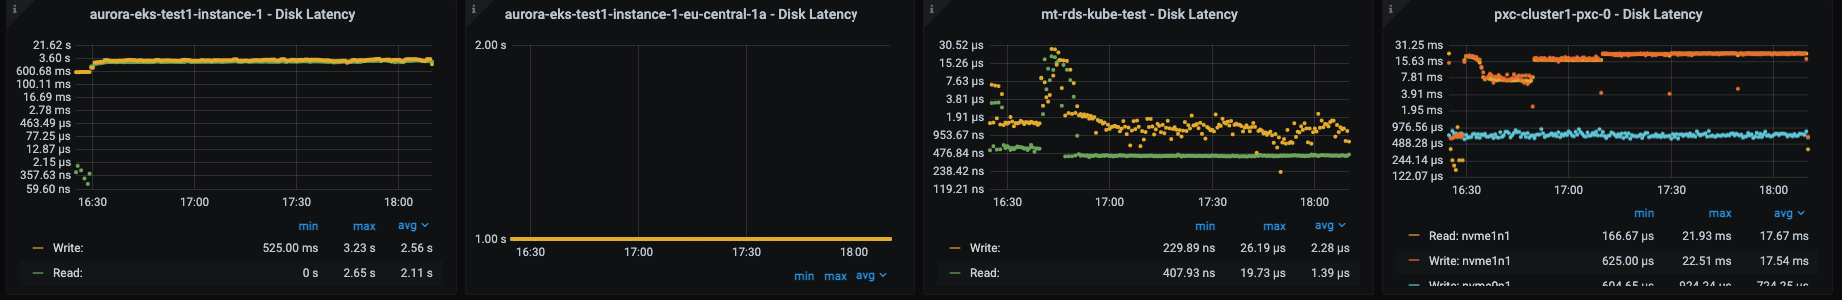 2 cpu ro large OS disk latency